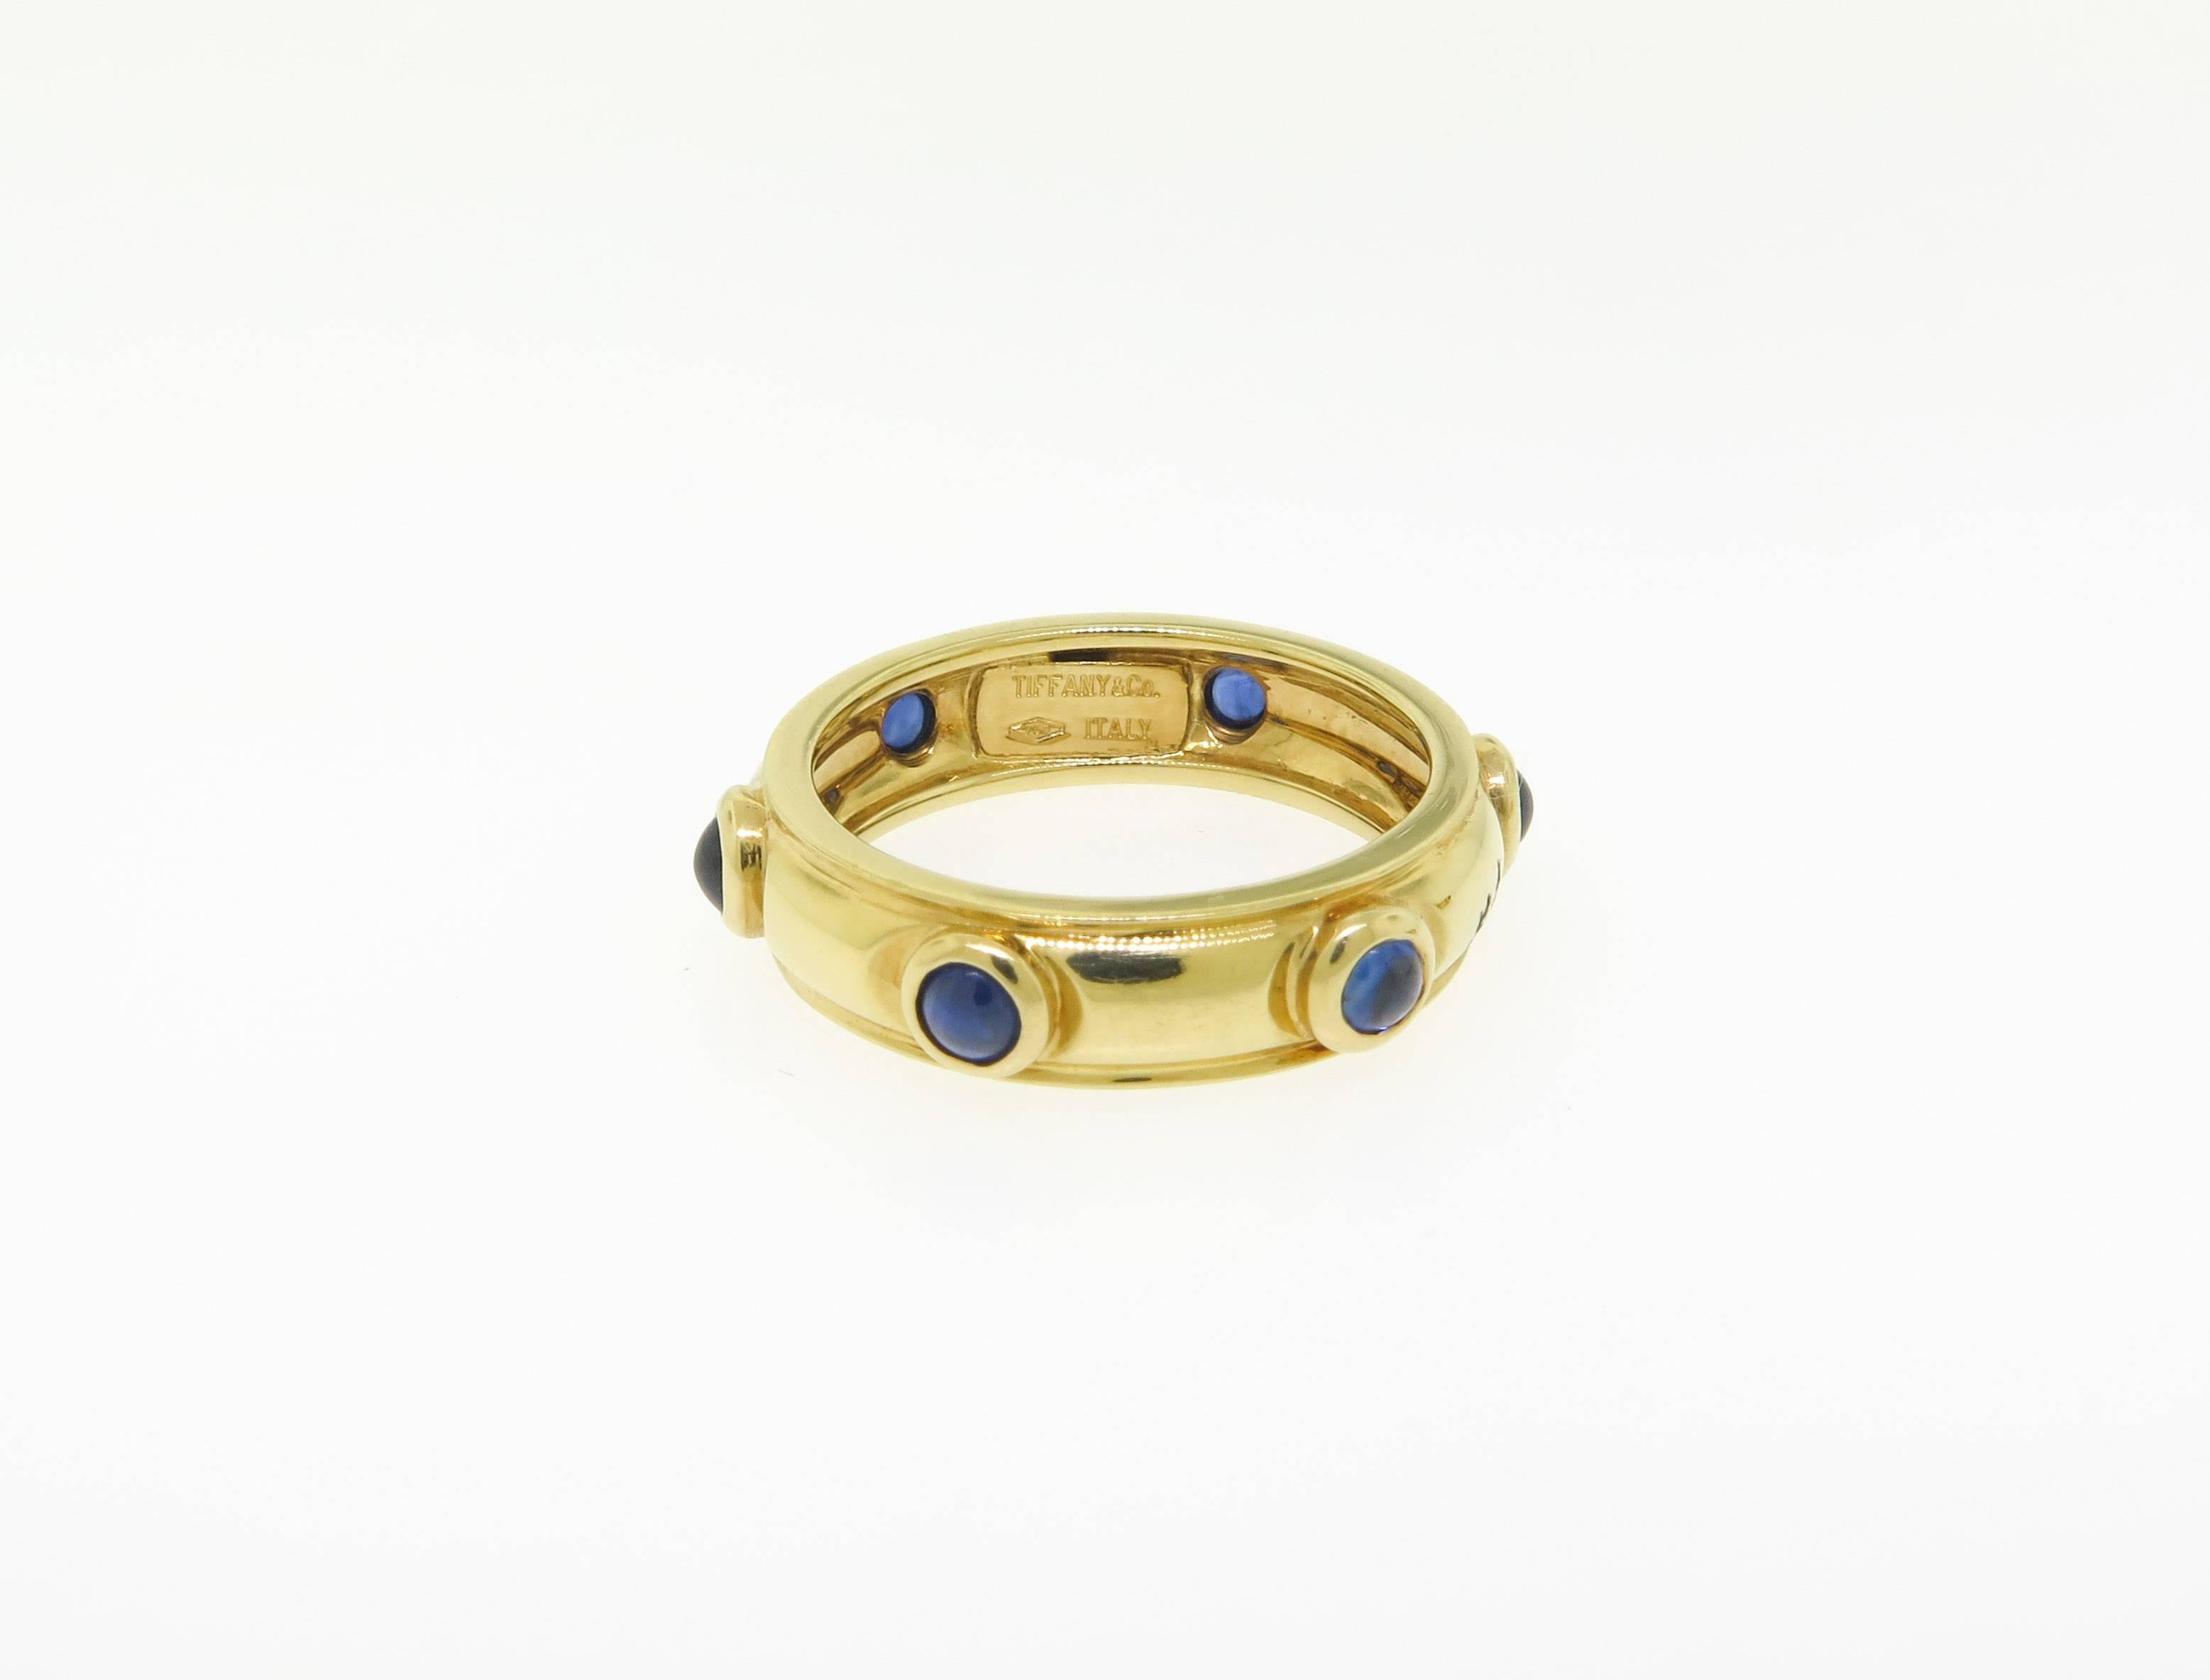 Chic ring created by Tiffany & Co. Made of 18k yellow gold and set with 6 cabochon sapphires. The ring is size 6.75. It is stamped with Tiffany & Co. maker's hallmark. Beautiful and wearable ring as a stackable, or to enjoy on it's own. 